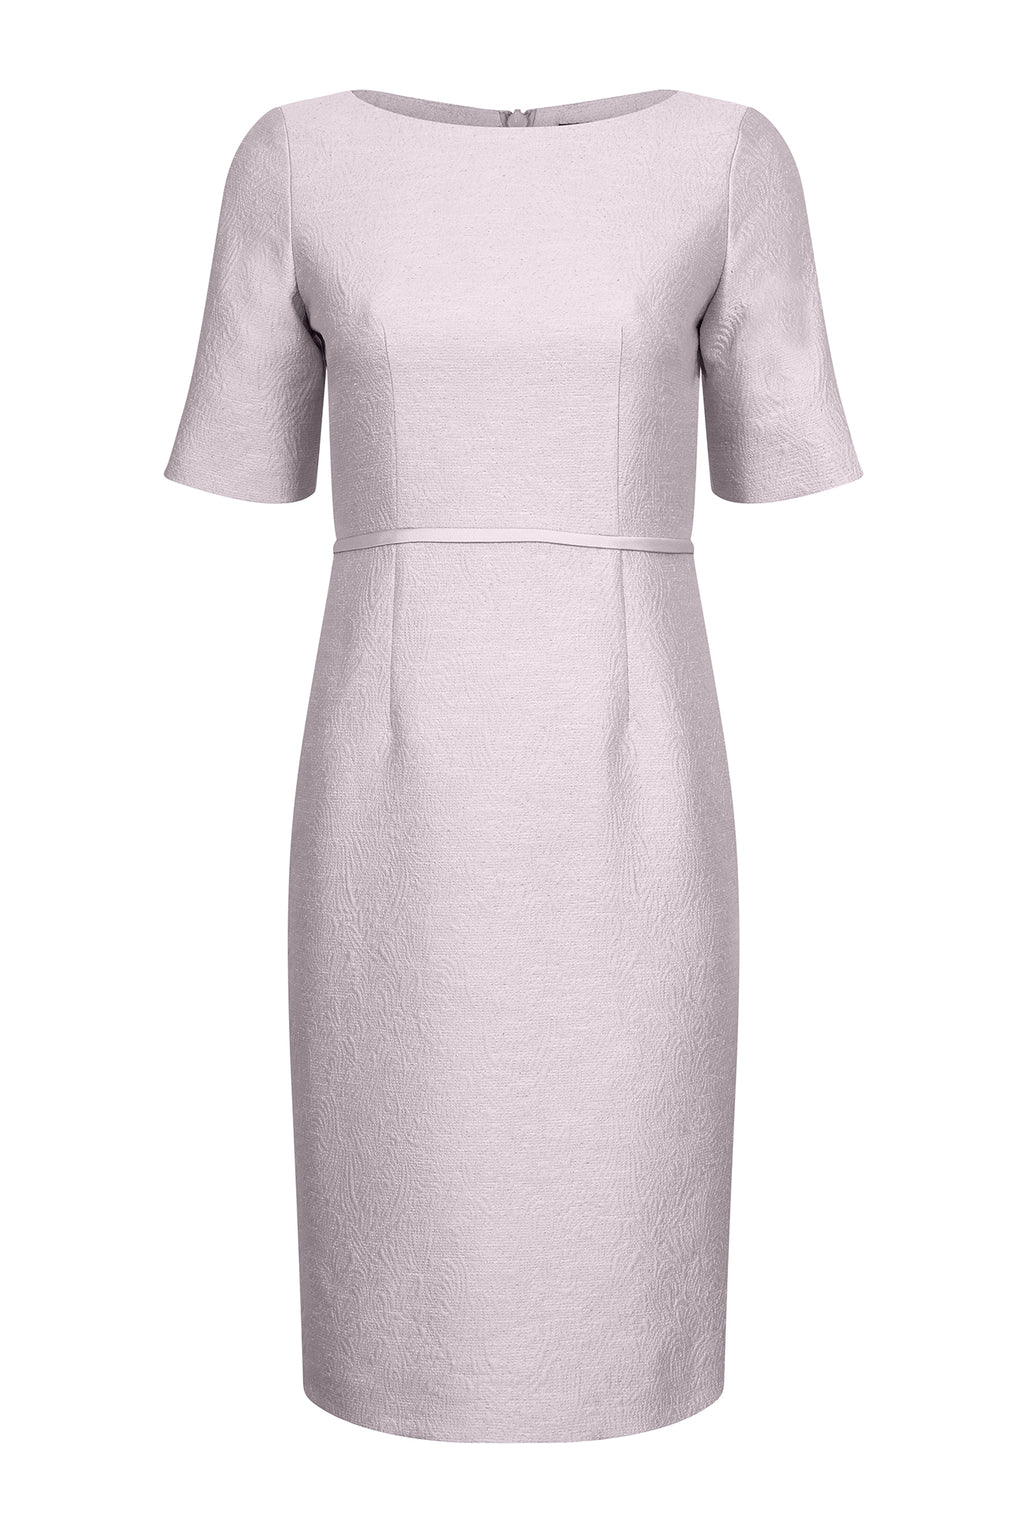 Angie Summer Brocade Pale Pink Dress | Lalage Beaumont